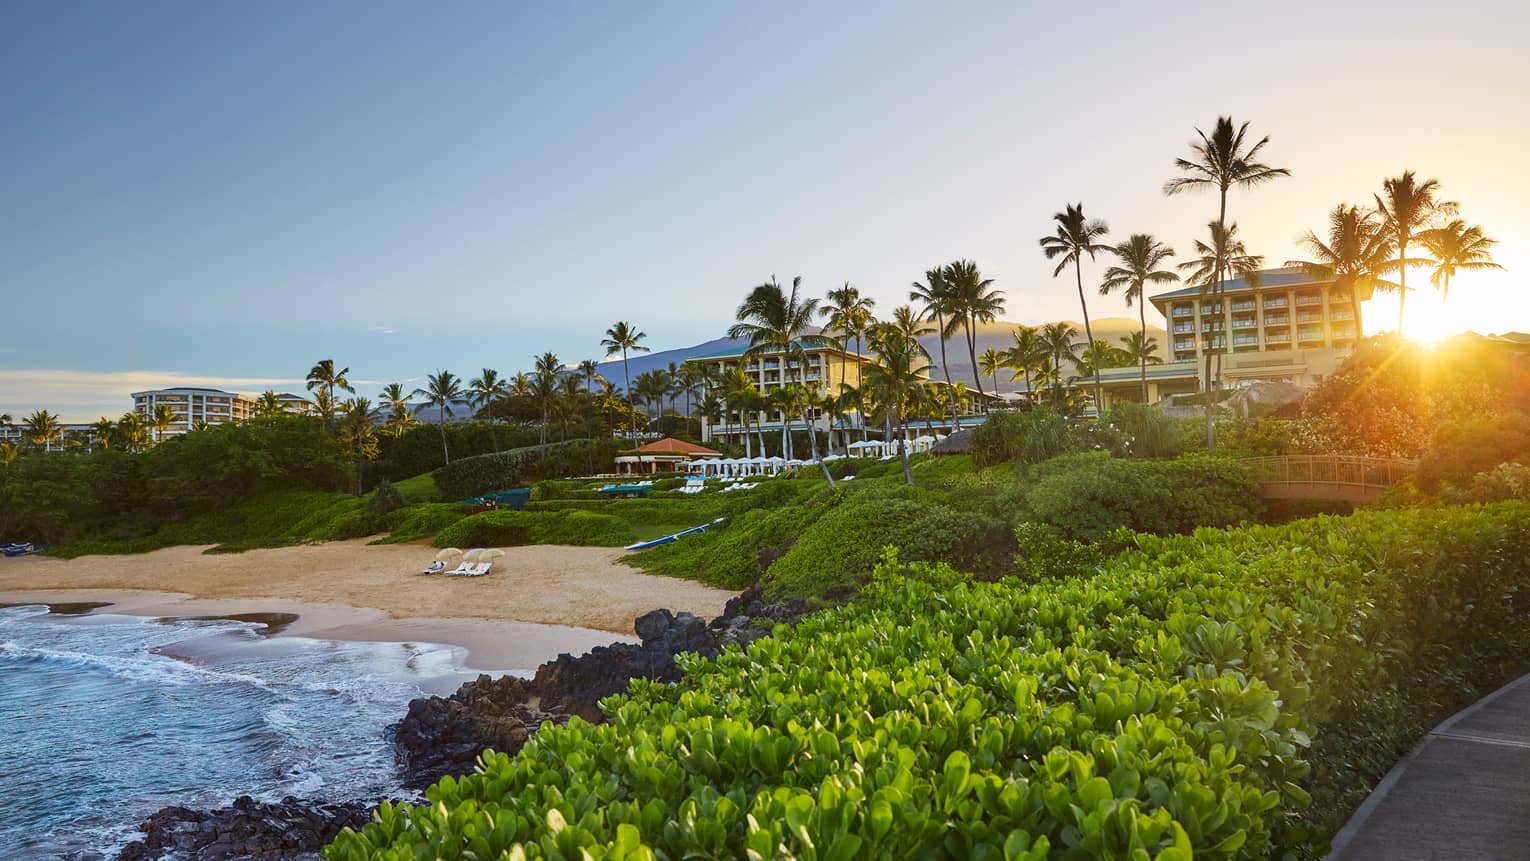 Four Seasons resort and beachfront at sunset, looking over ocean through lush green plants